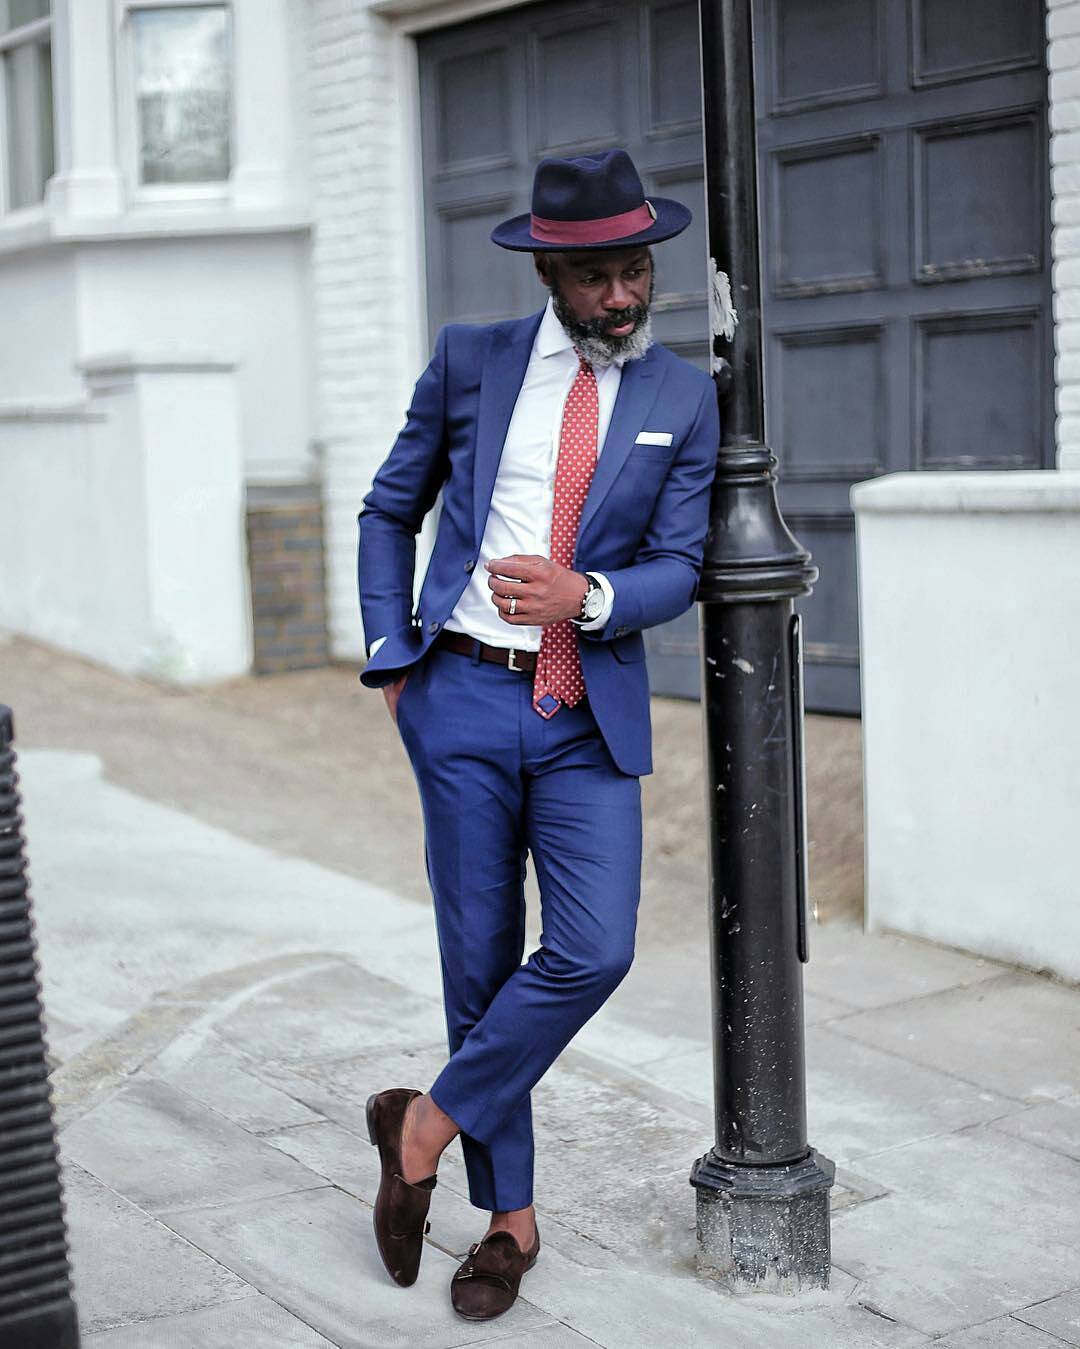 Learn To Suit Up From These Fashionable Men!